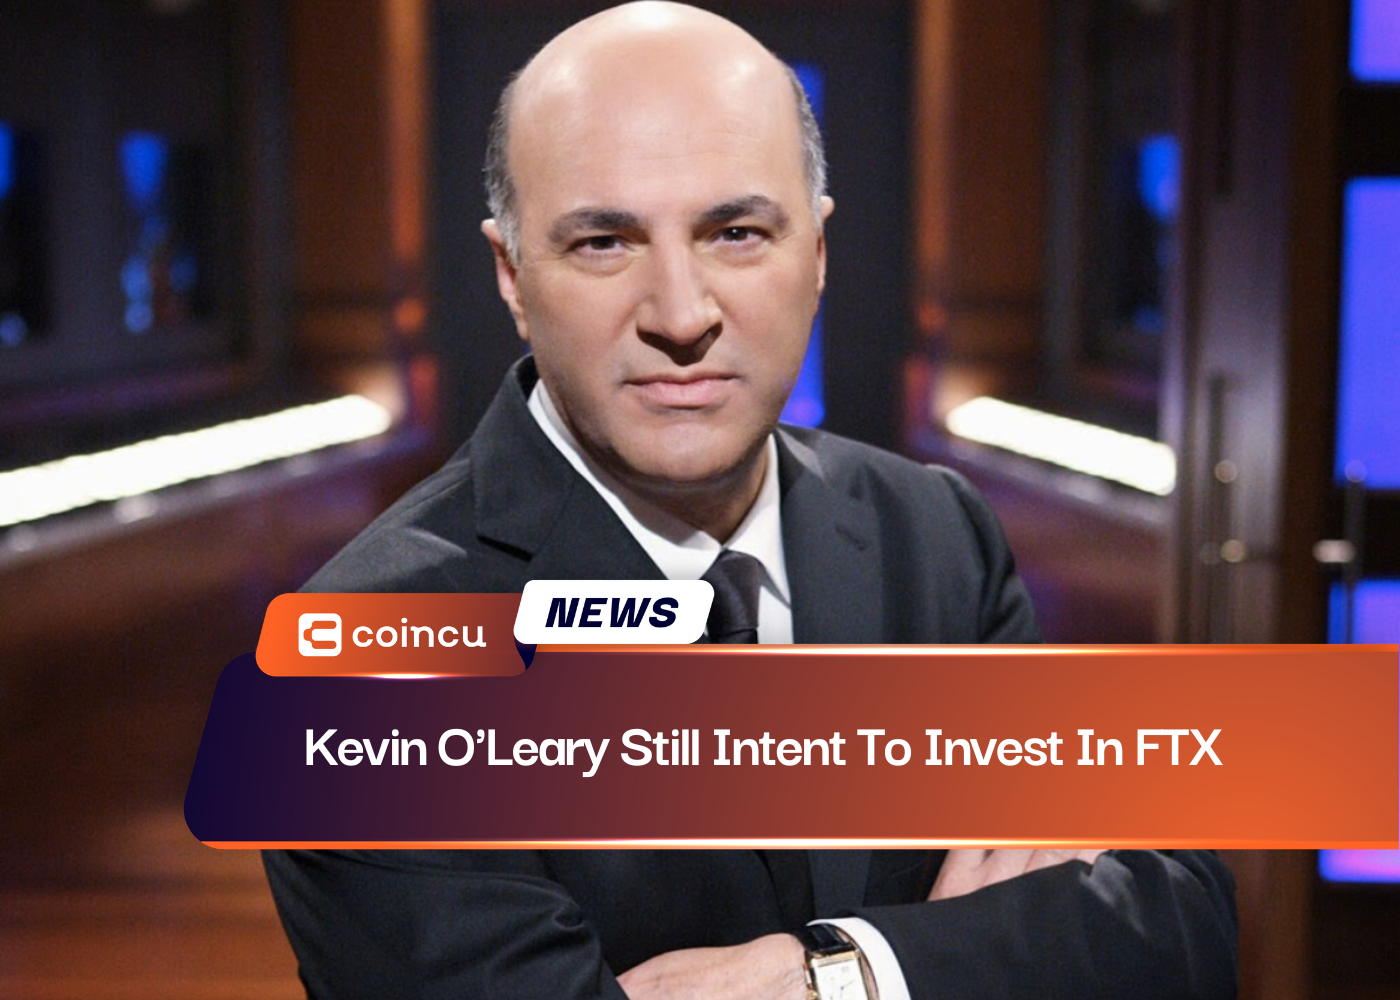 Kevin O'Leary 仍有意投资 FTX